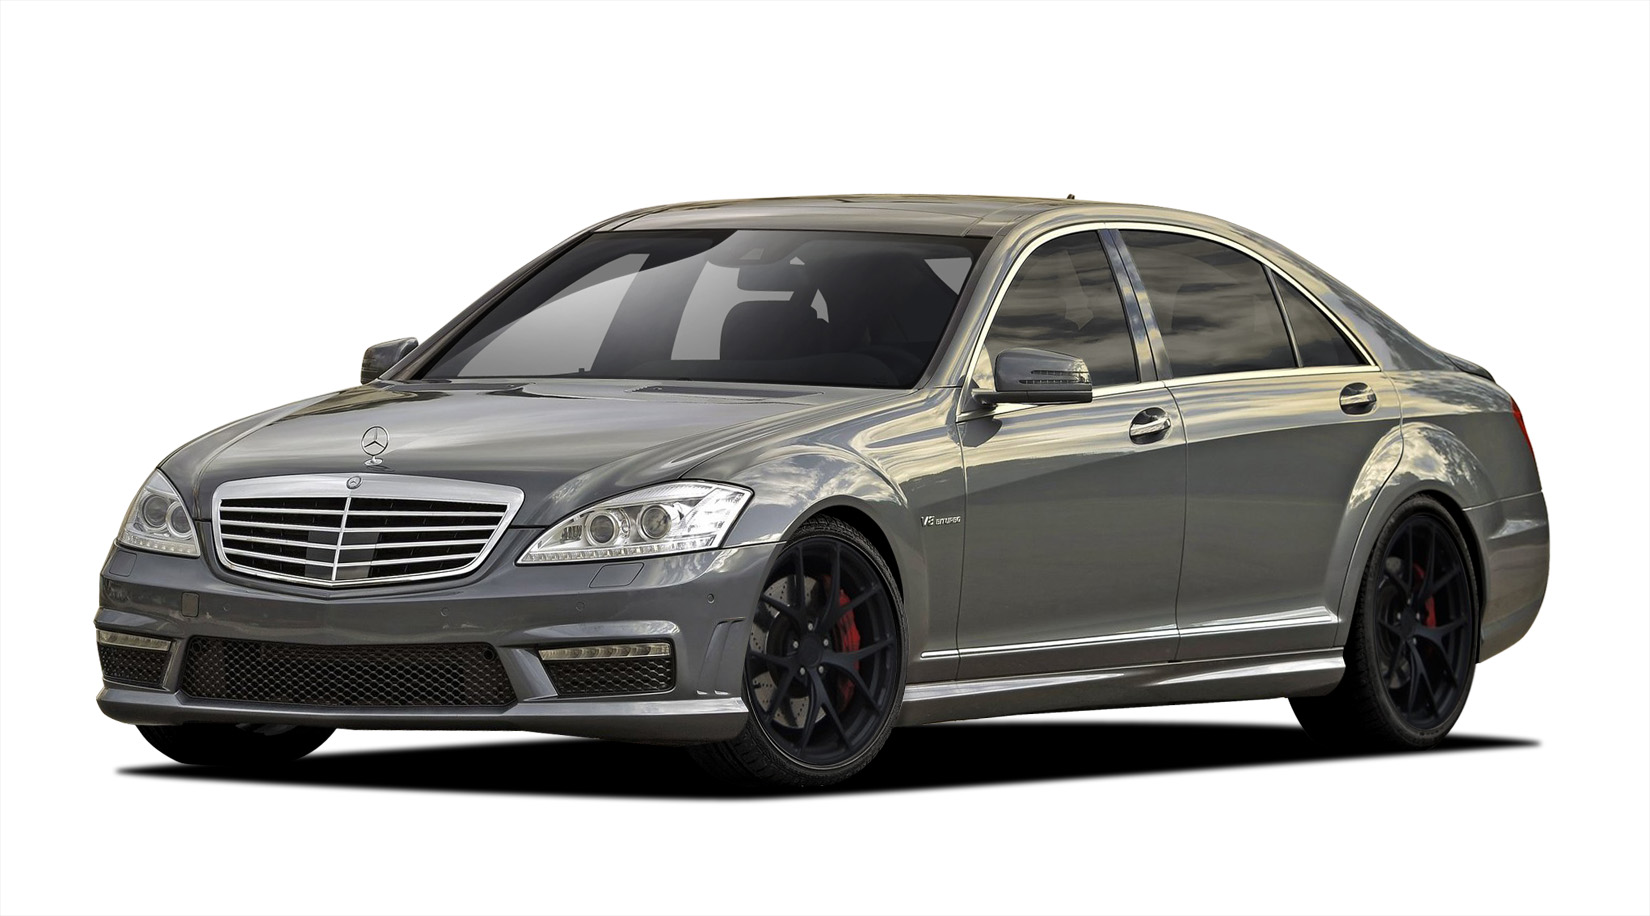 2010 Mercedes S Class ALL - Polypropylene Body Kit Bodykit - Mercedes S Class W221 Vaero S63 Look Kit ( with PDC ) - 4 Piece - Includes S63 Look Front